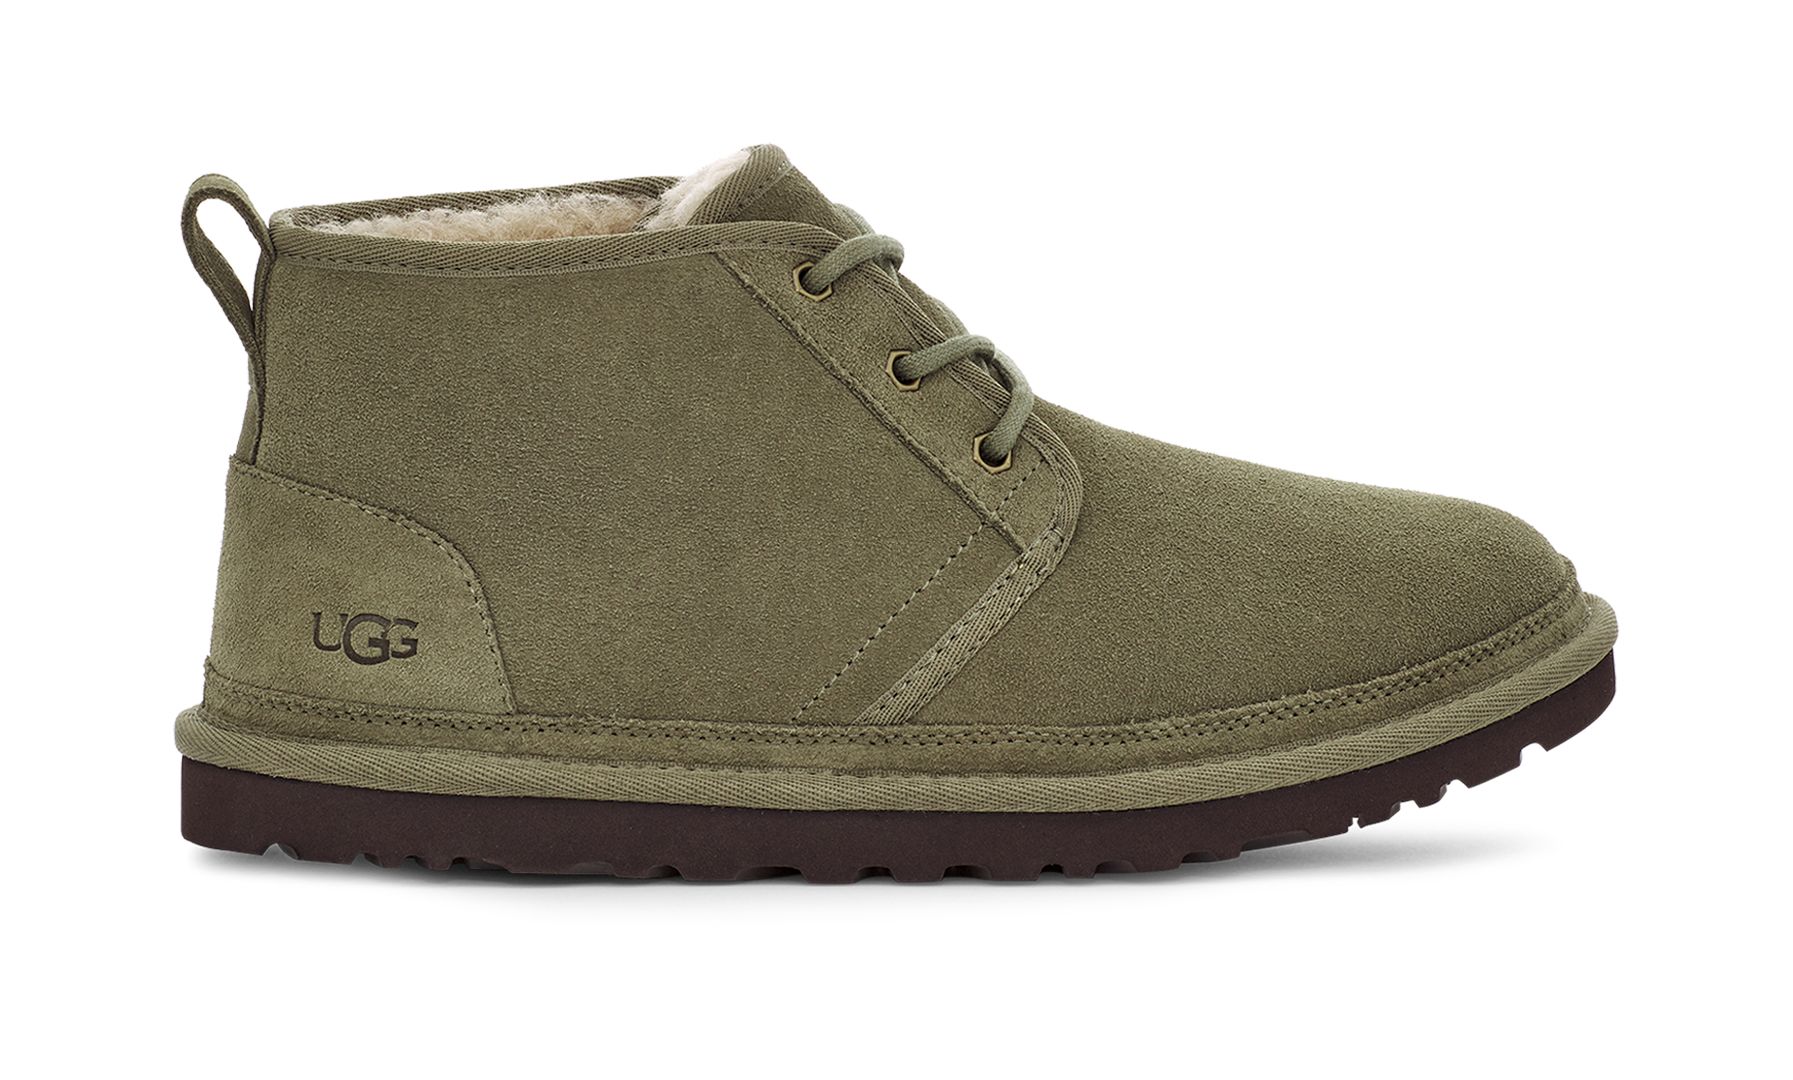 UGG Men's Neumel Leather Shoes Chukka Boots in Green, Size 15 | UGG (US)